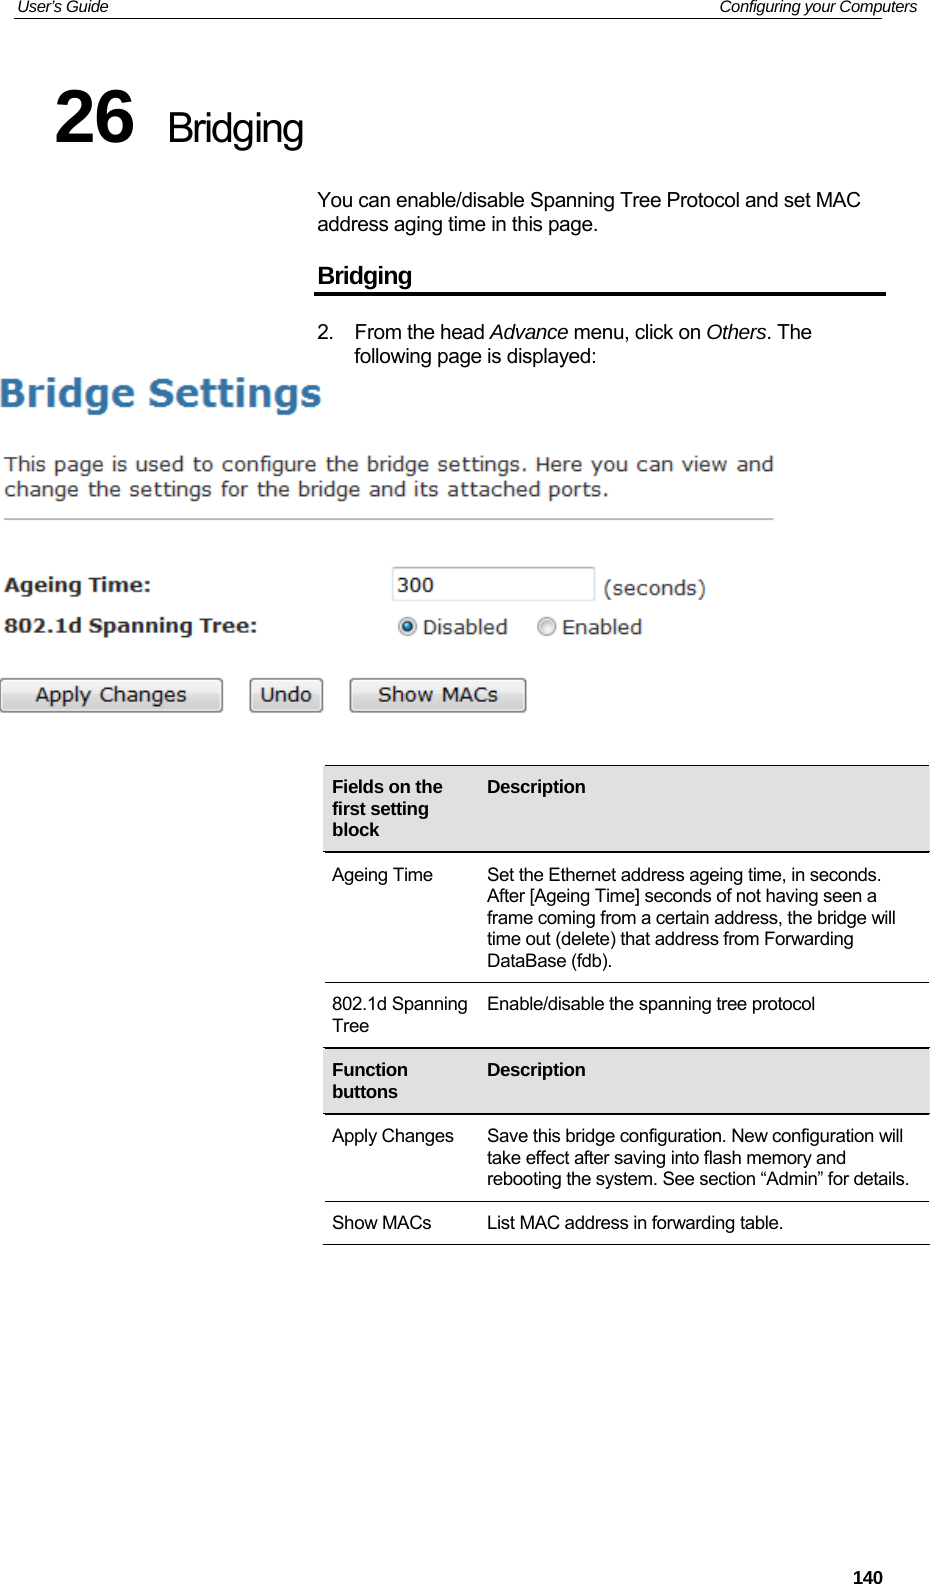 User’s Guide   Configuring your Computers 26  Bridging You can enable/disable Spanning Tree Protocol and set MAC address aging time in this page. Bridging 2. From the head Advance menu, click on Others. The following page is displayed:      Fields on the first setting block Description  Ageing Time  Set the Ethernet address ageing time, in seconds. After [Ageing Time] seconds of not having seen a frame coming from a certain address, the bridge will time out (delete) that address from Forwarding DataBase (fdb). 802.1d Spanning Tree Enable/disable the spanning tree protocol        Function buttons  Description     Apply Changes  Save this bridge configuration. New configuration will take effect after saving into flash memory and rebooting the system. See section “Admin” for details. Show MACs  List MAC address in forwarding table.        140